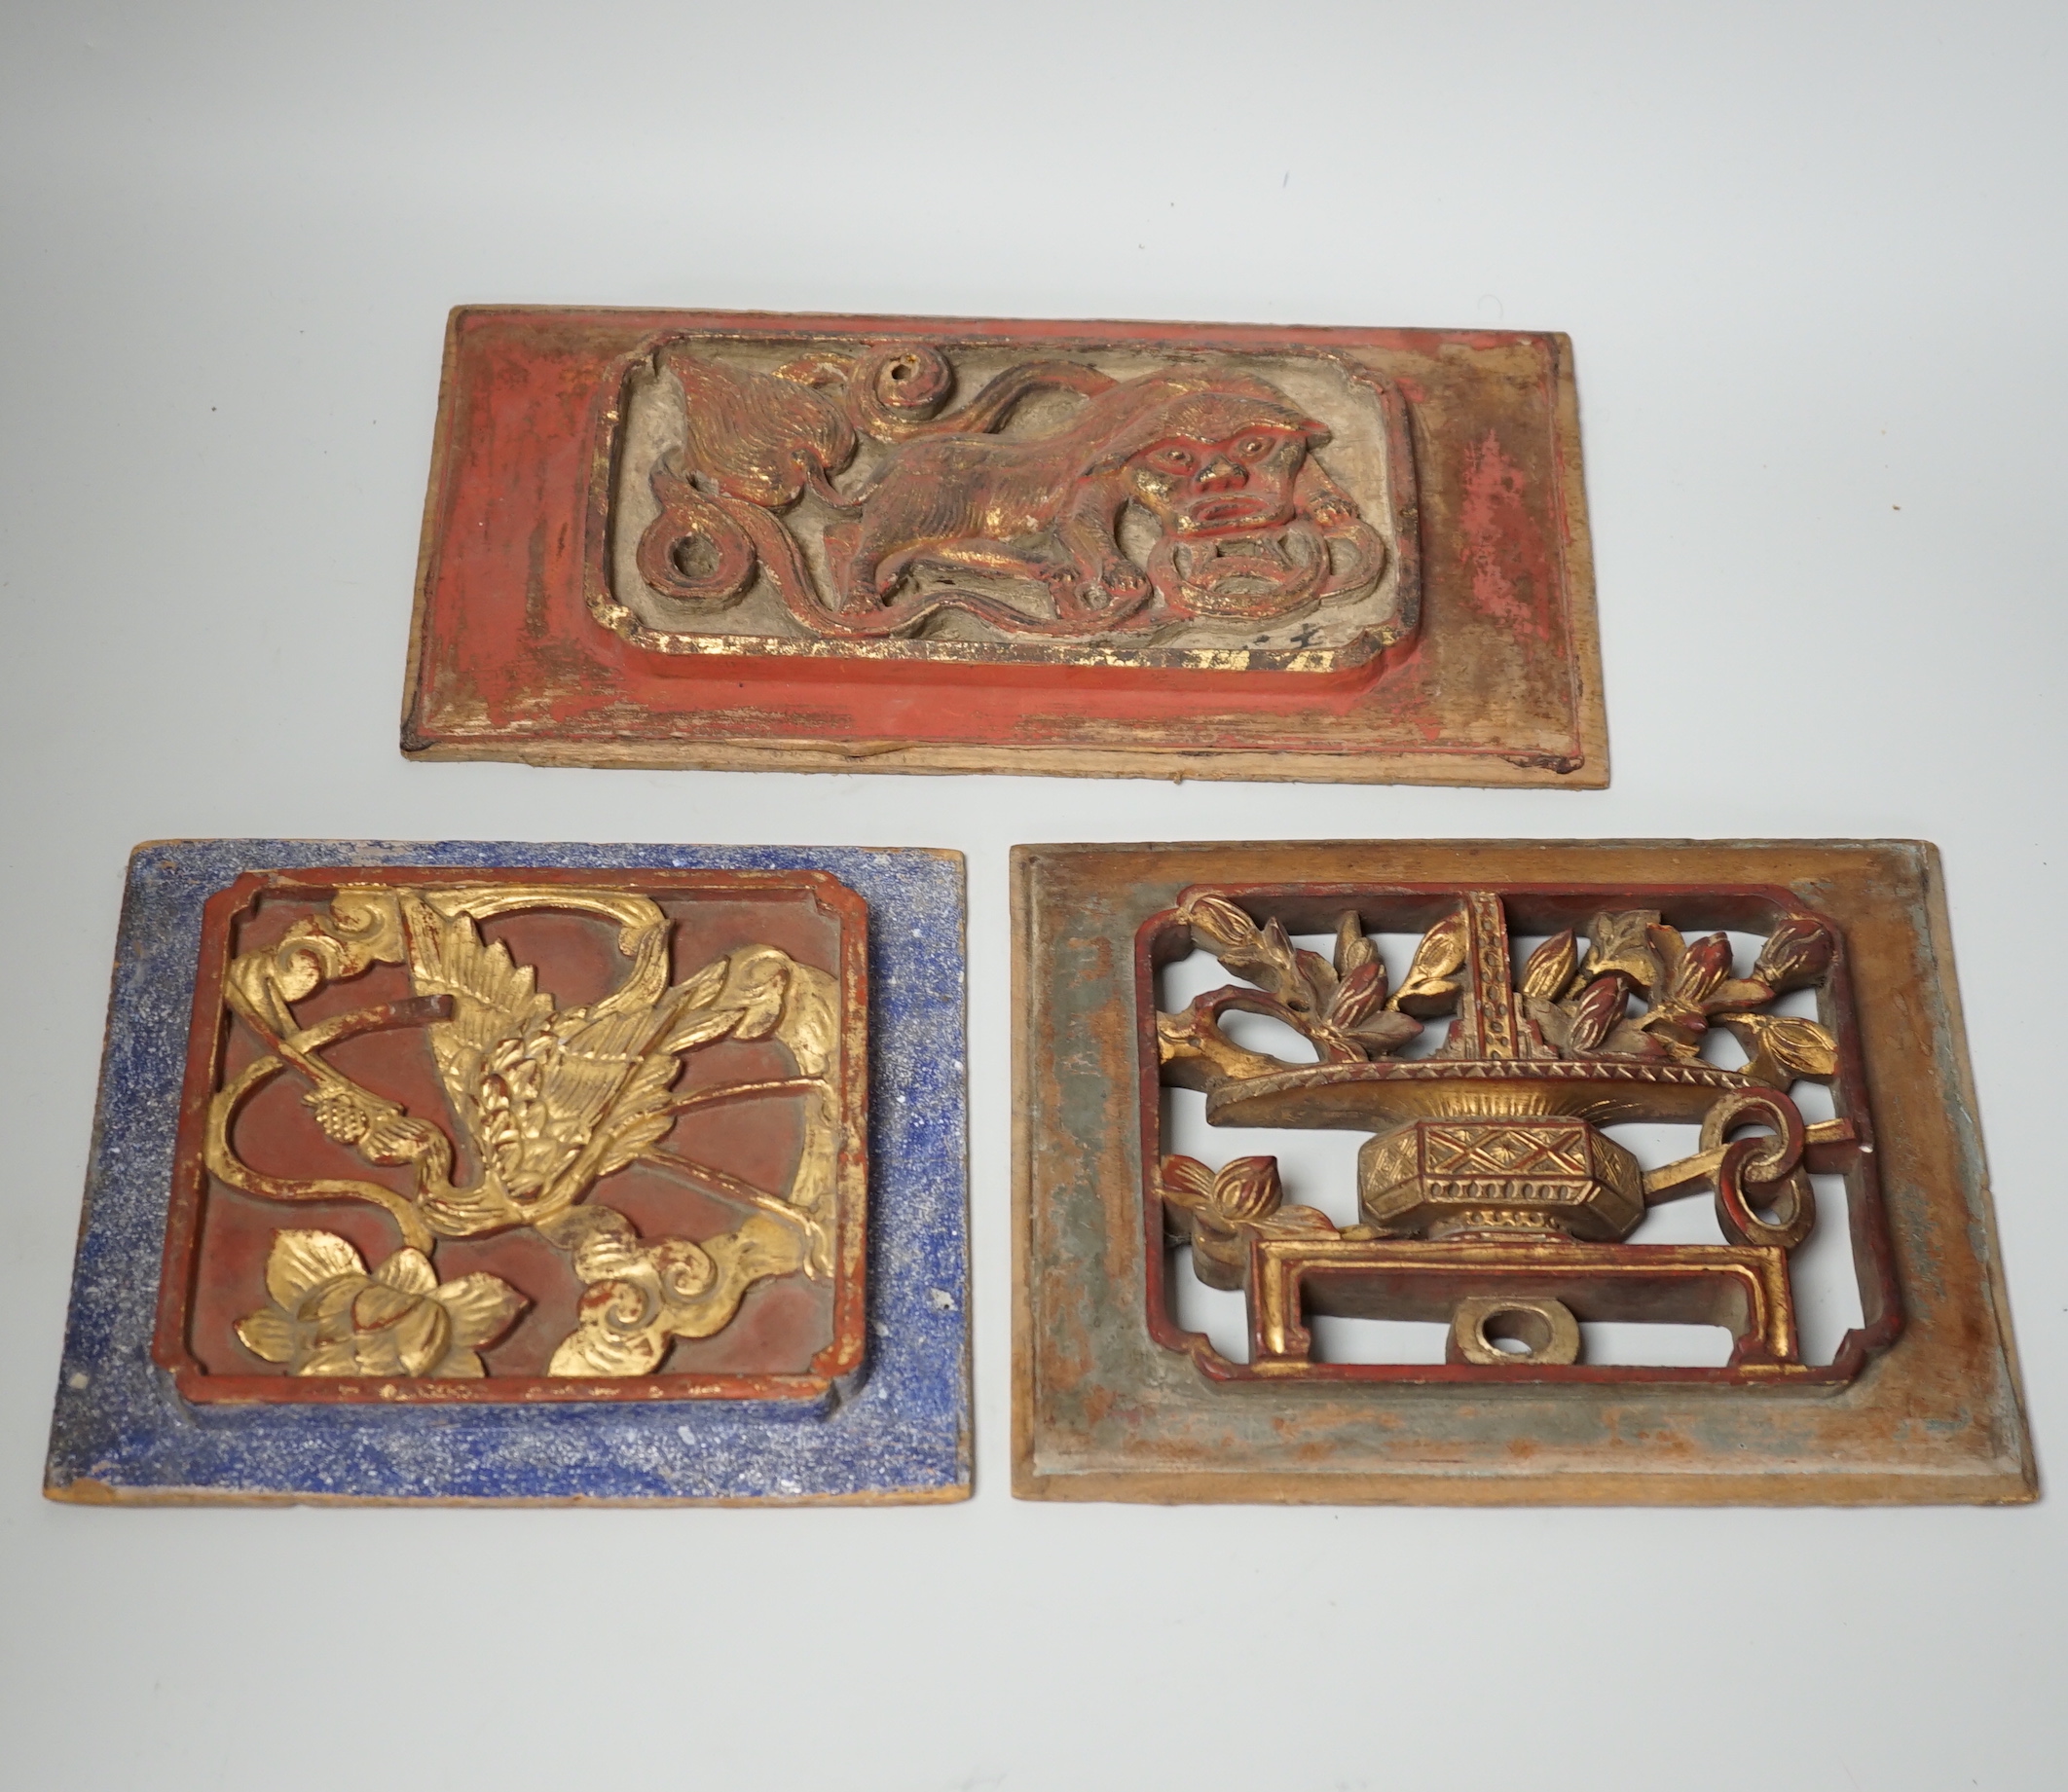 Three Chinese gilded and lacquered wood panels, early 20th century, longest 31cm